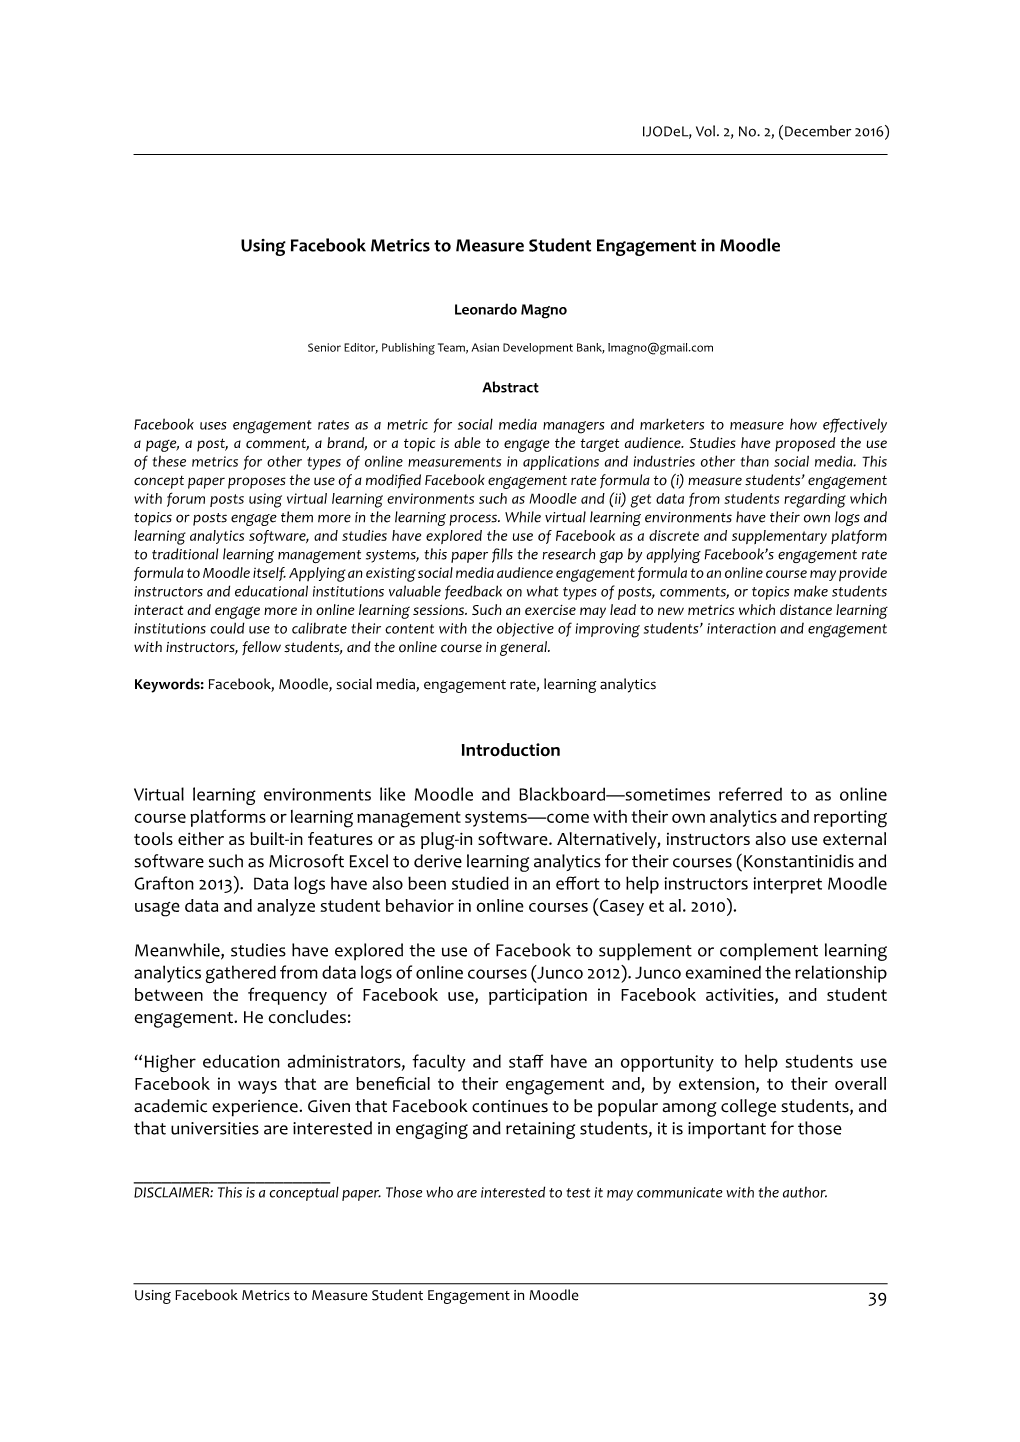 Using Facebook Metrics to Measure Student Engagement in Moodle